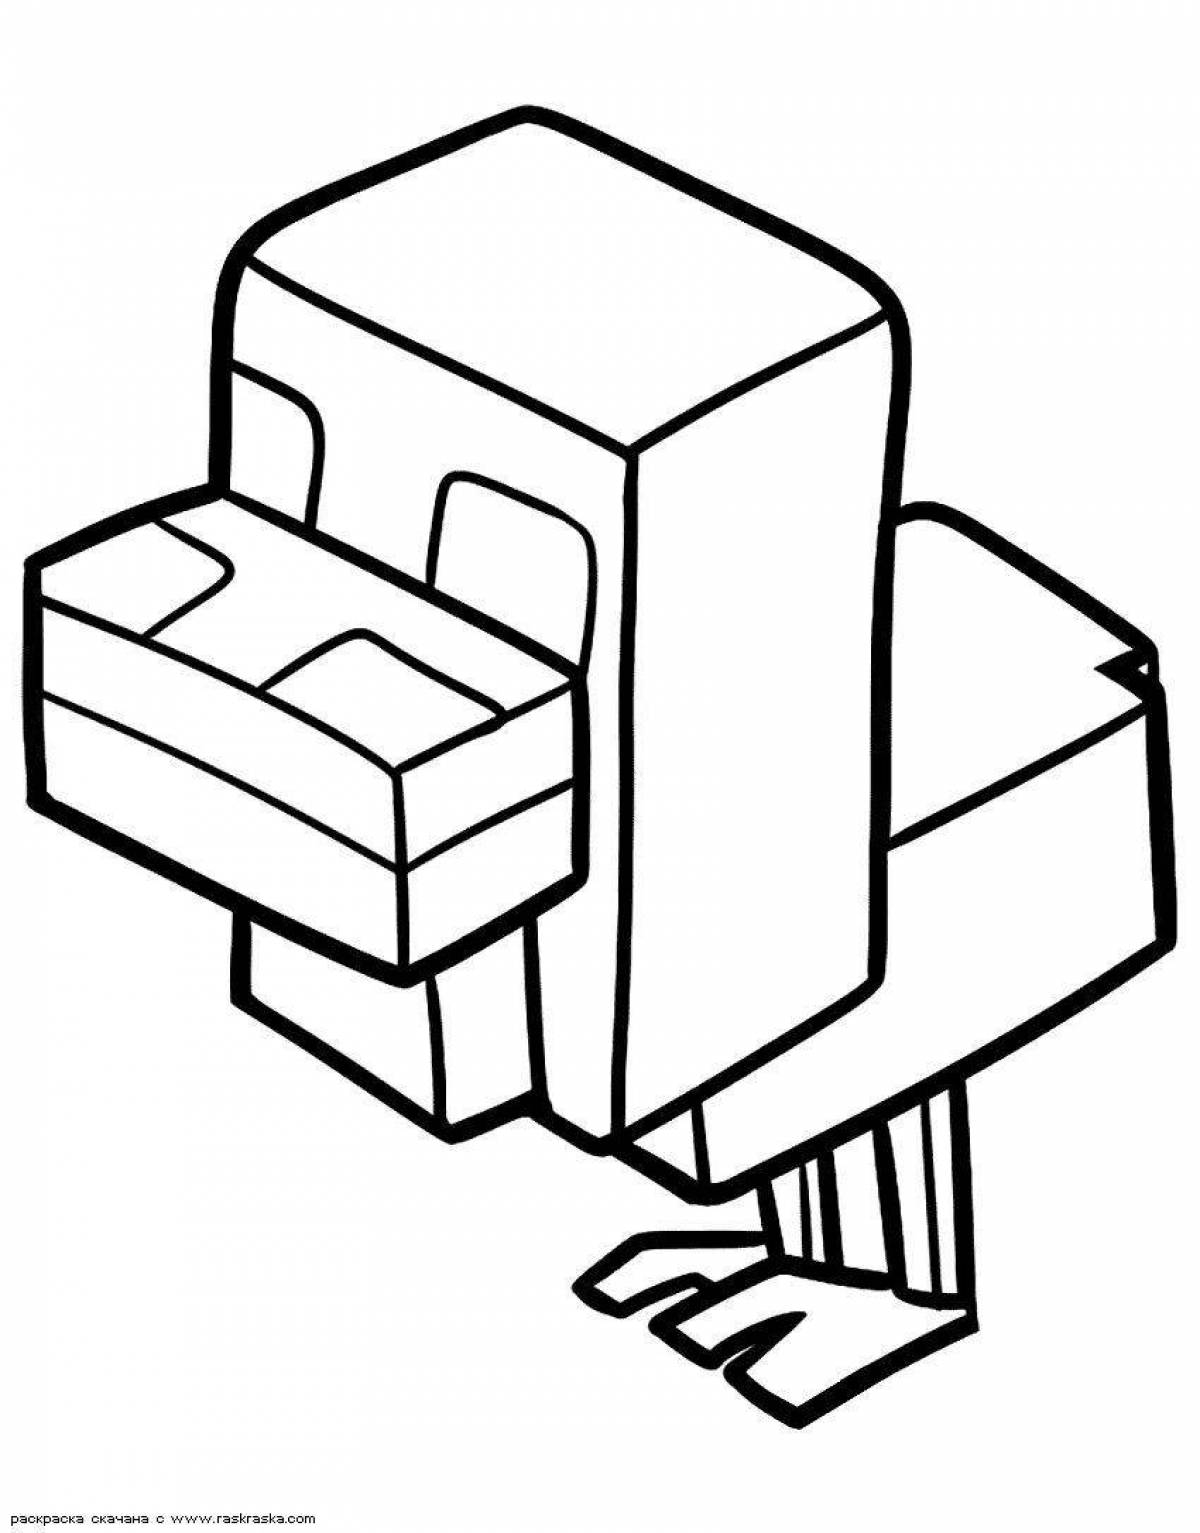 Gourmet chicken minecraft coloring page